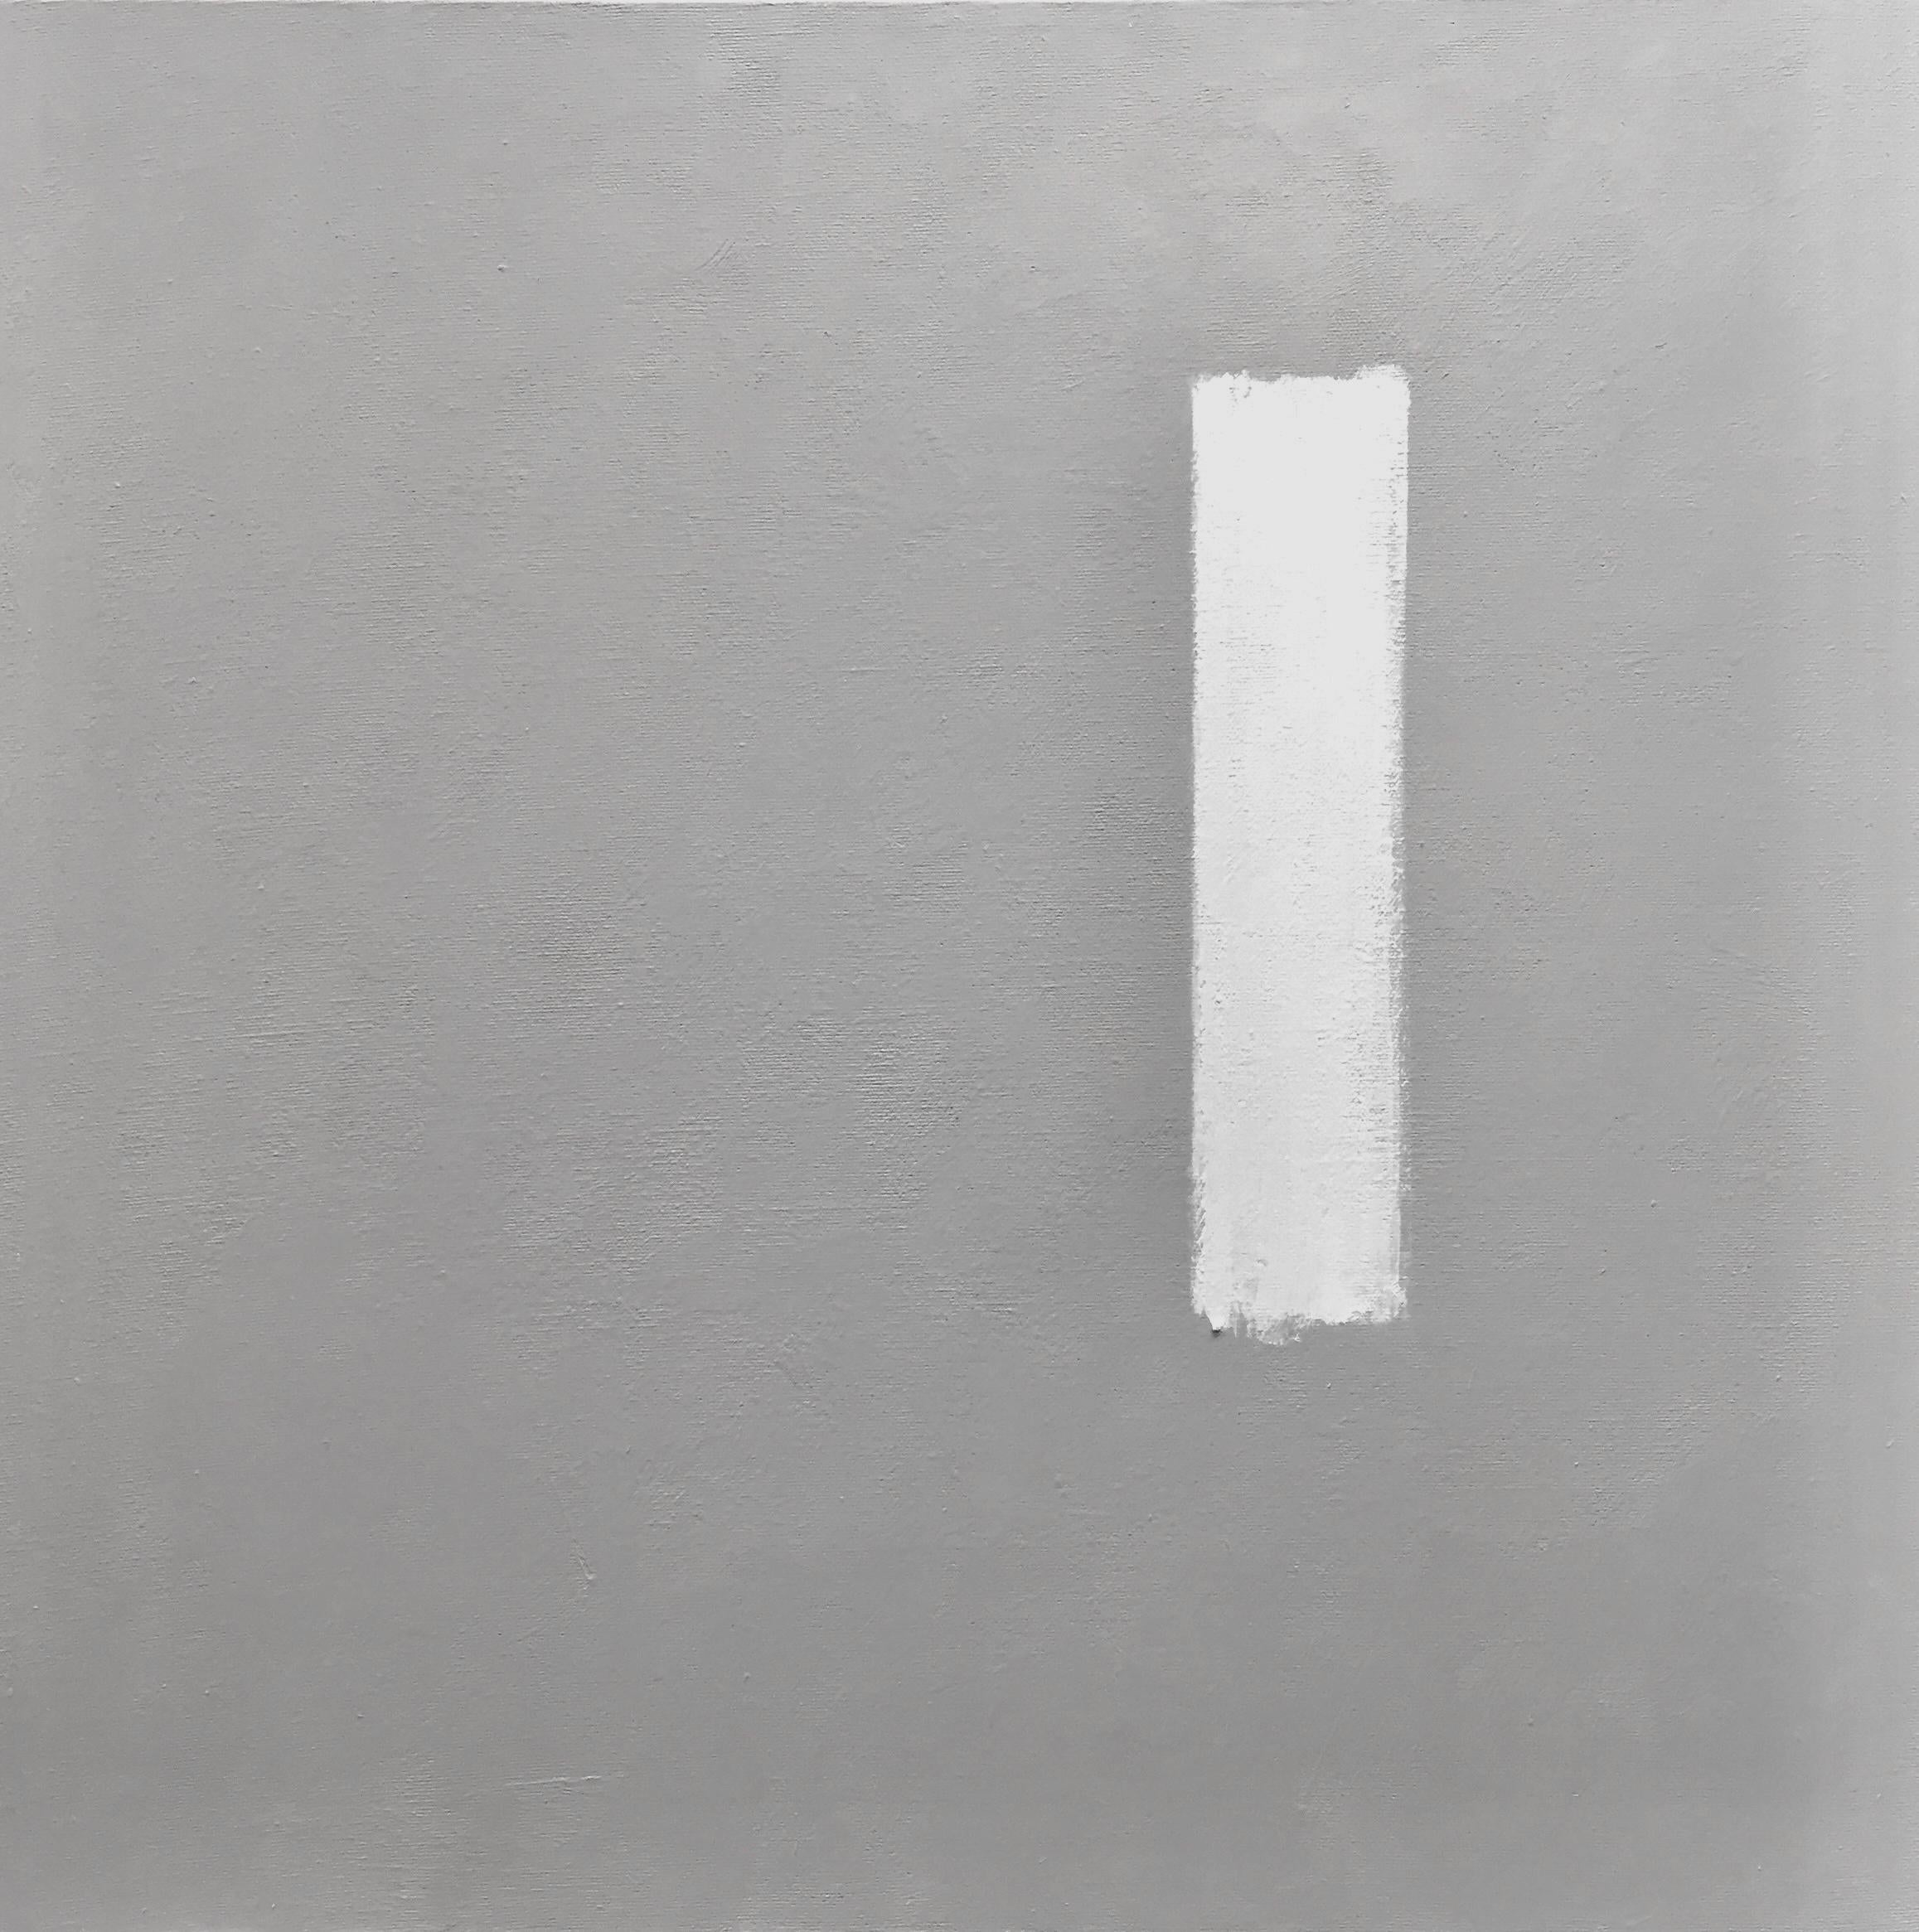 Contemporary abstract painting, modern and minimal with emphasis on simplifying the composition. Multiple layers of grey paint build up a quiet texture in the background while the white brush stroke commands attention. Understated yet engaging, it